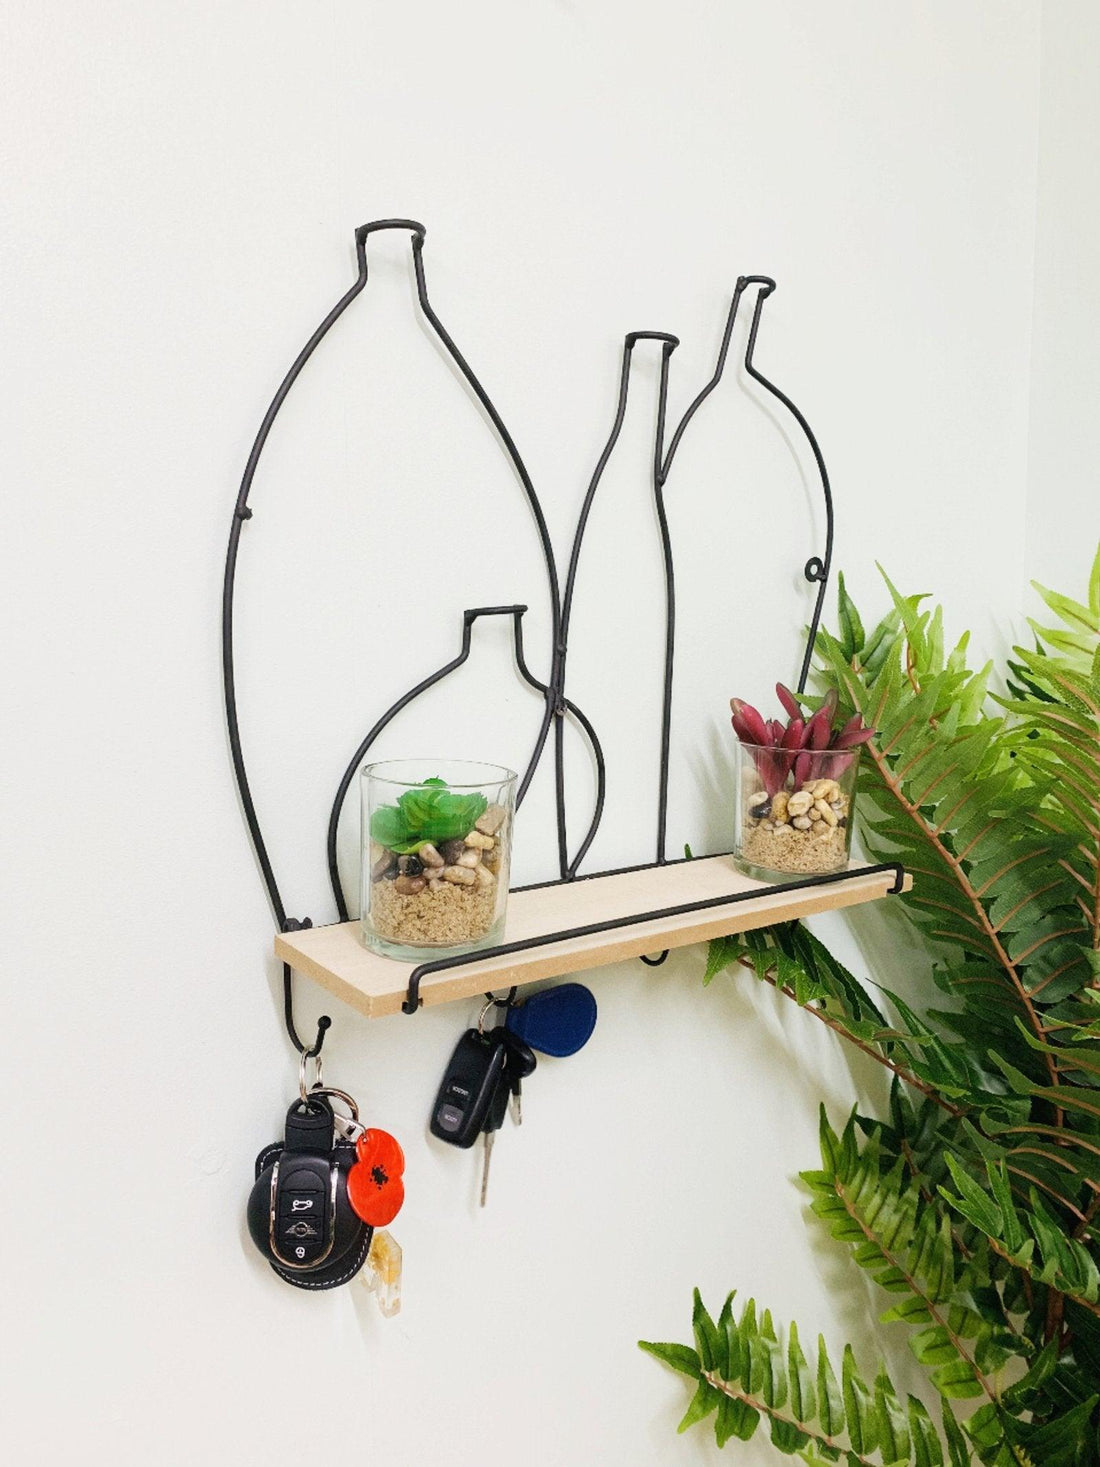 Wire Bottle Design Shelf with 4 Hooks - £25.99 - Wall Hanging Shelving 